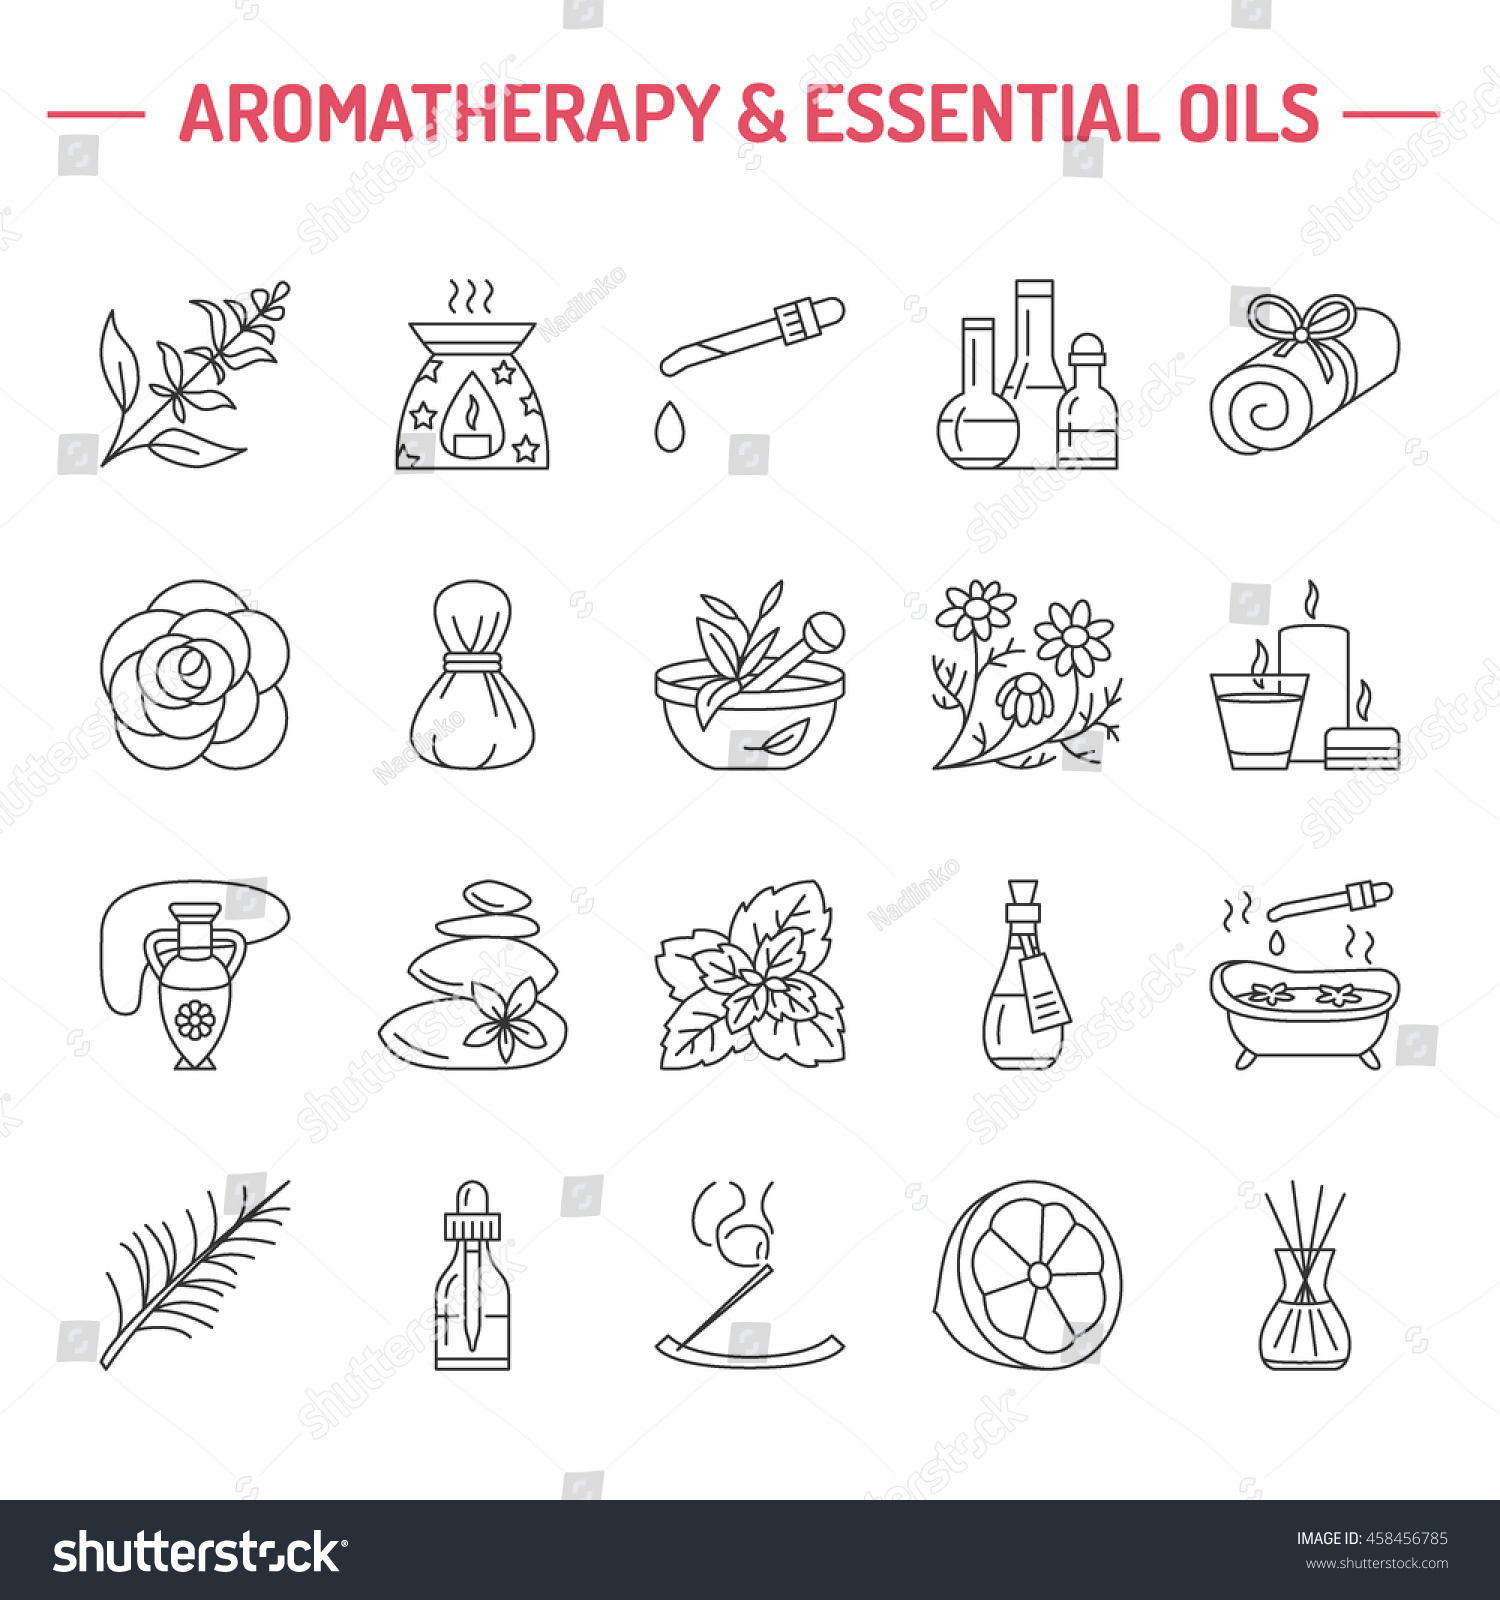 Modern vector line icons of aromatherapy and essential oils. Elements - diffuser, oil burner, spa candles, incense sticks. Linear pictogram with editable strokes for salon. #458456785